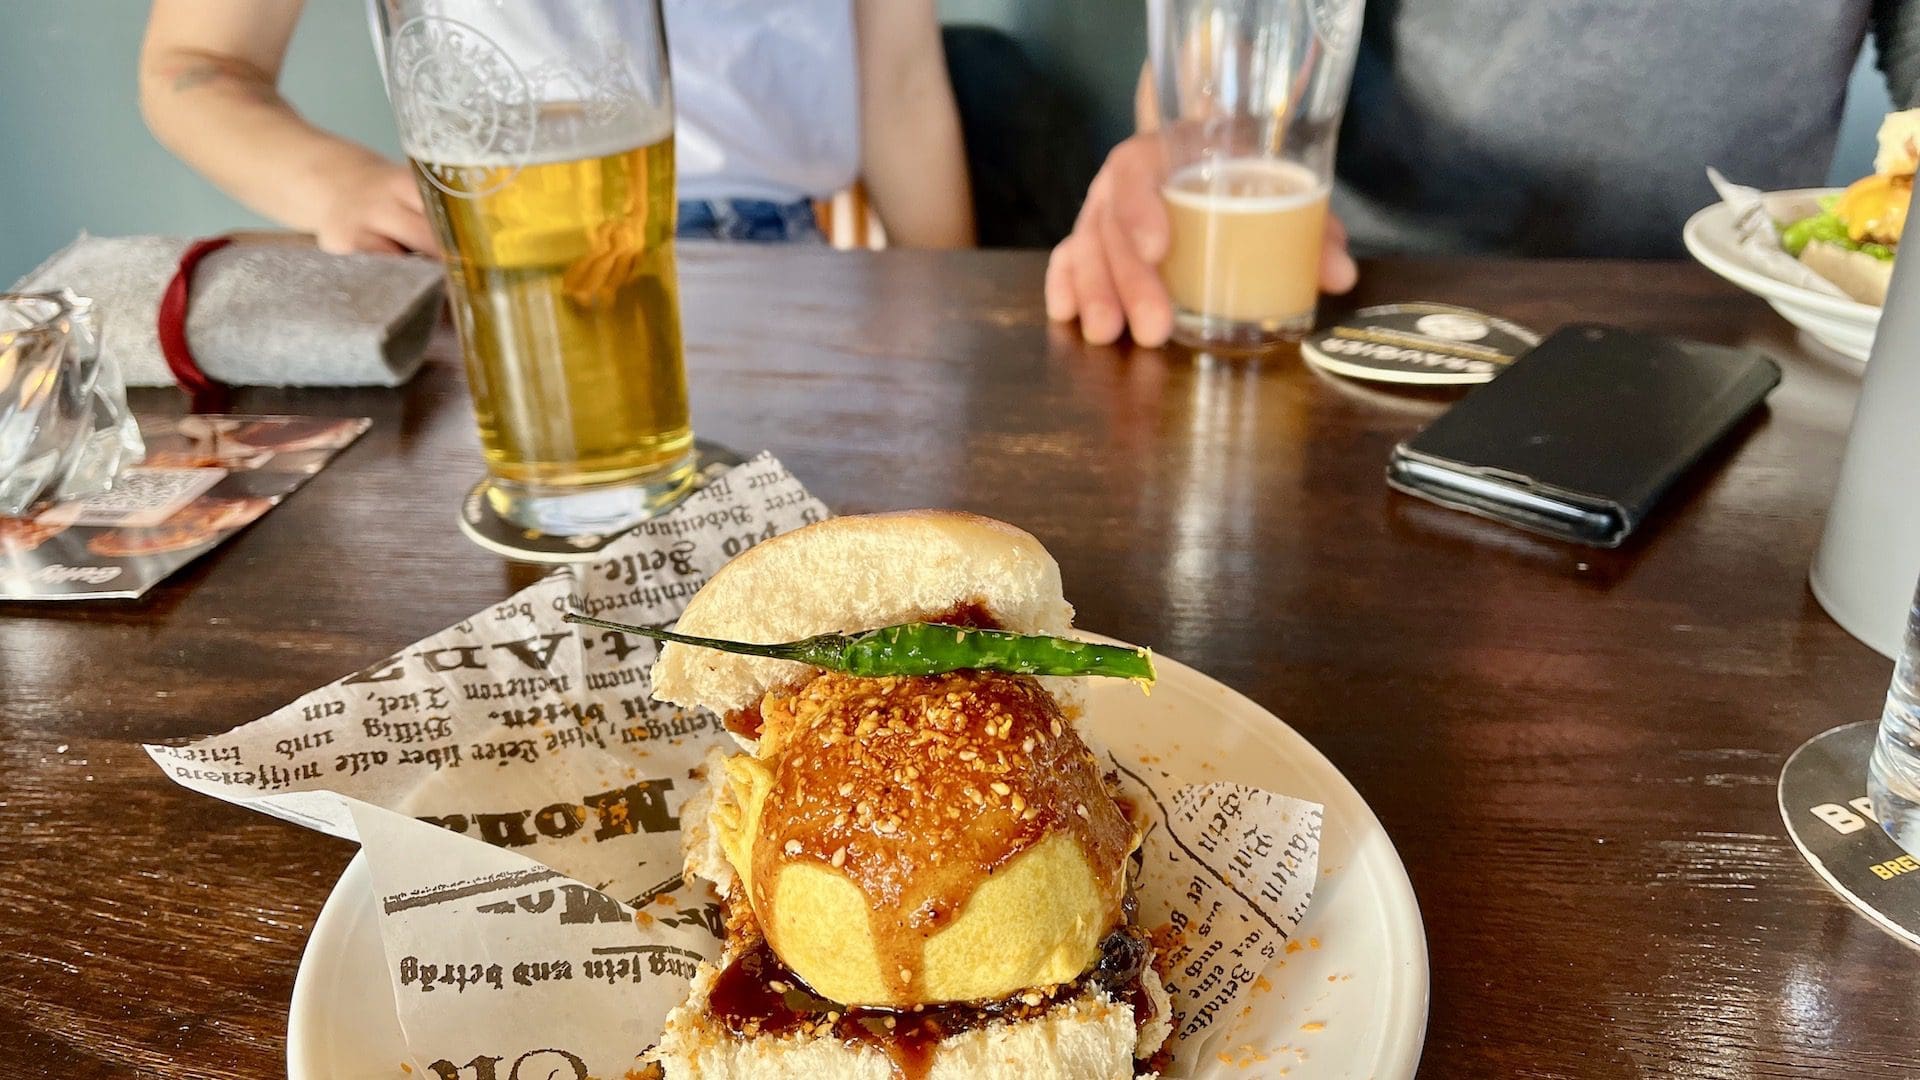 Mouthwatering burgers and handcrafted beers on the Berlin Craft Beer Tour with Food by Walk With Us Tours